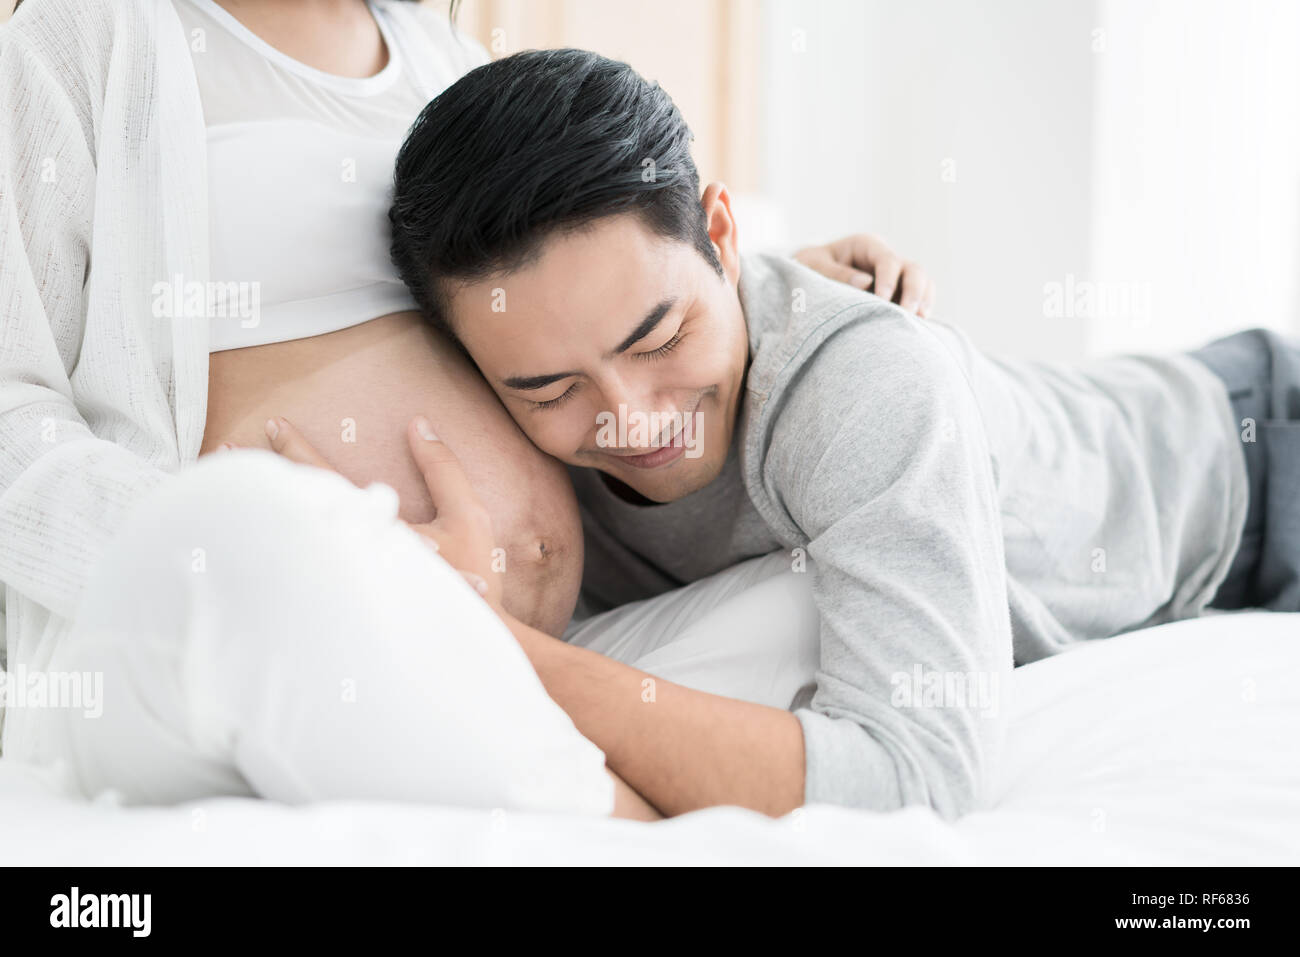 Asian Handsome man is listening to his Asian beautiful pregnant wife's tummy and smiling. Family love concept. Stock Photo